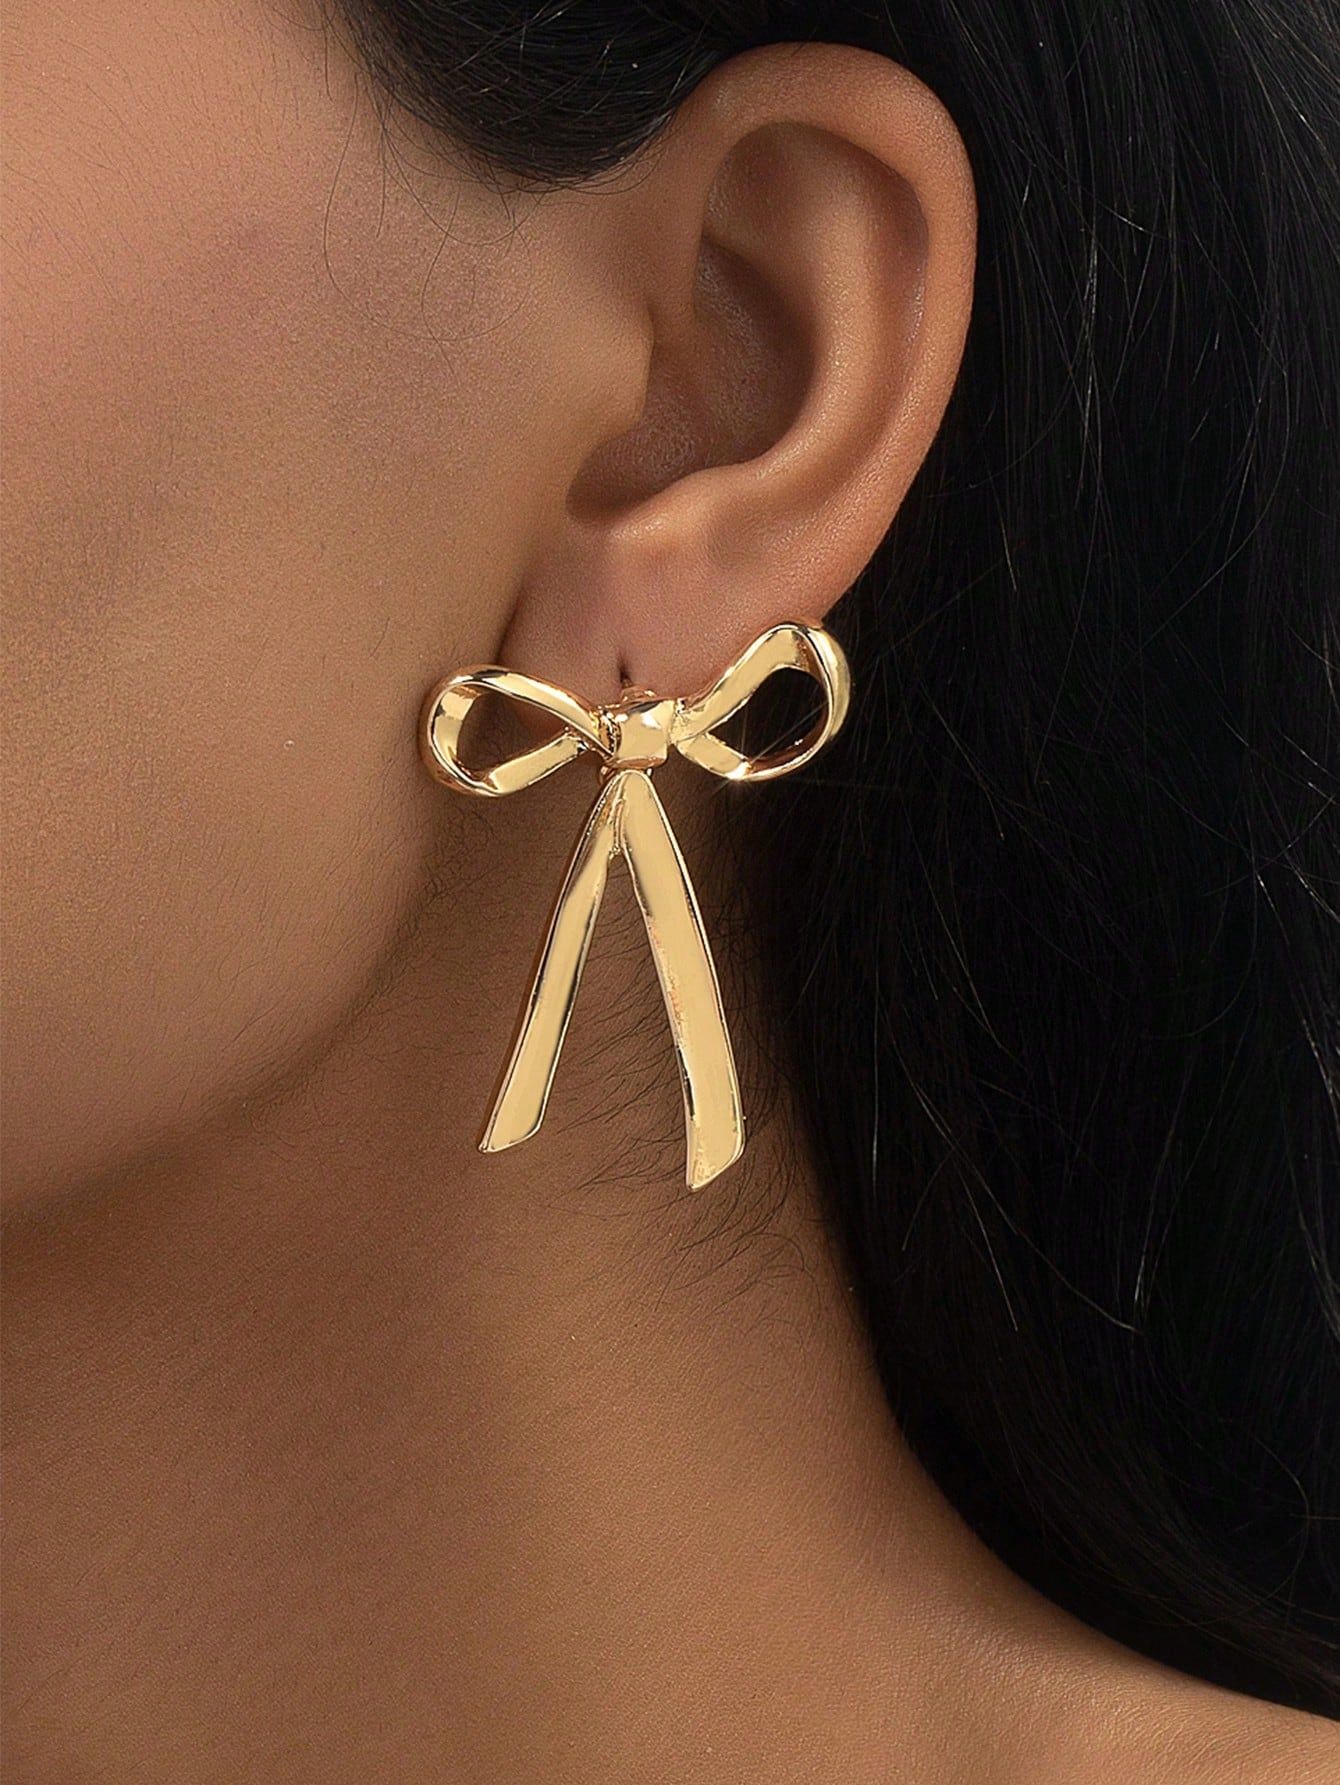 1 Pair Golden Color Metal Bow Stud Earring for Women Daily Wear Jewelry | SHEIN